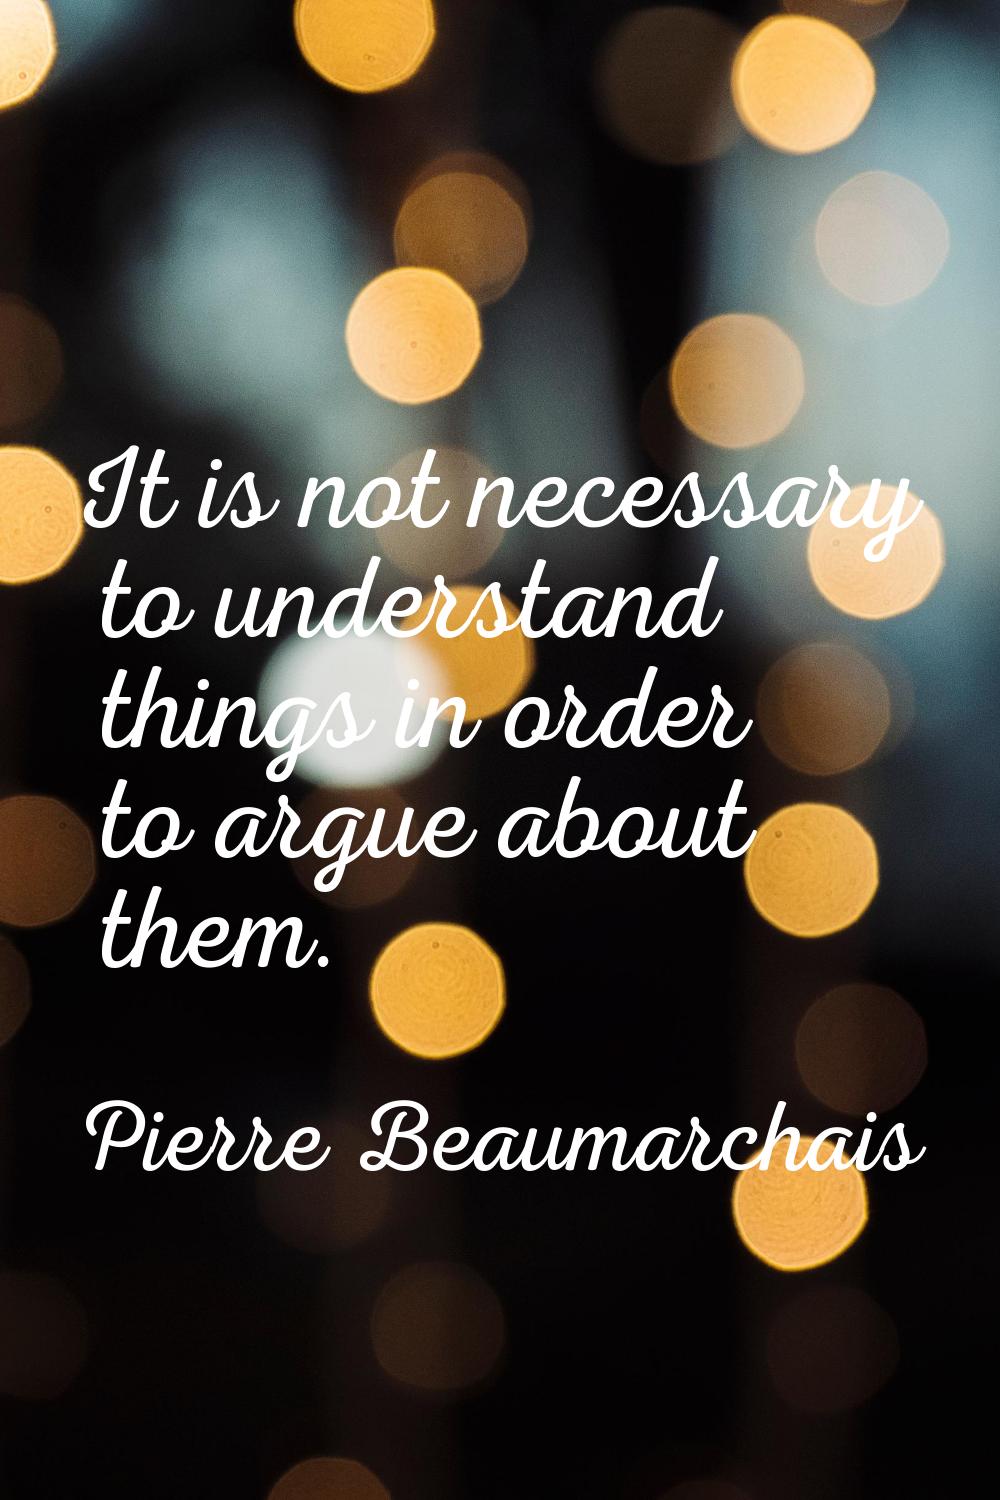 It is not necessary to understand things in order to argue about them.